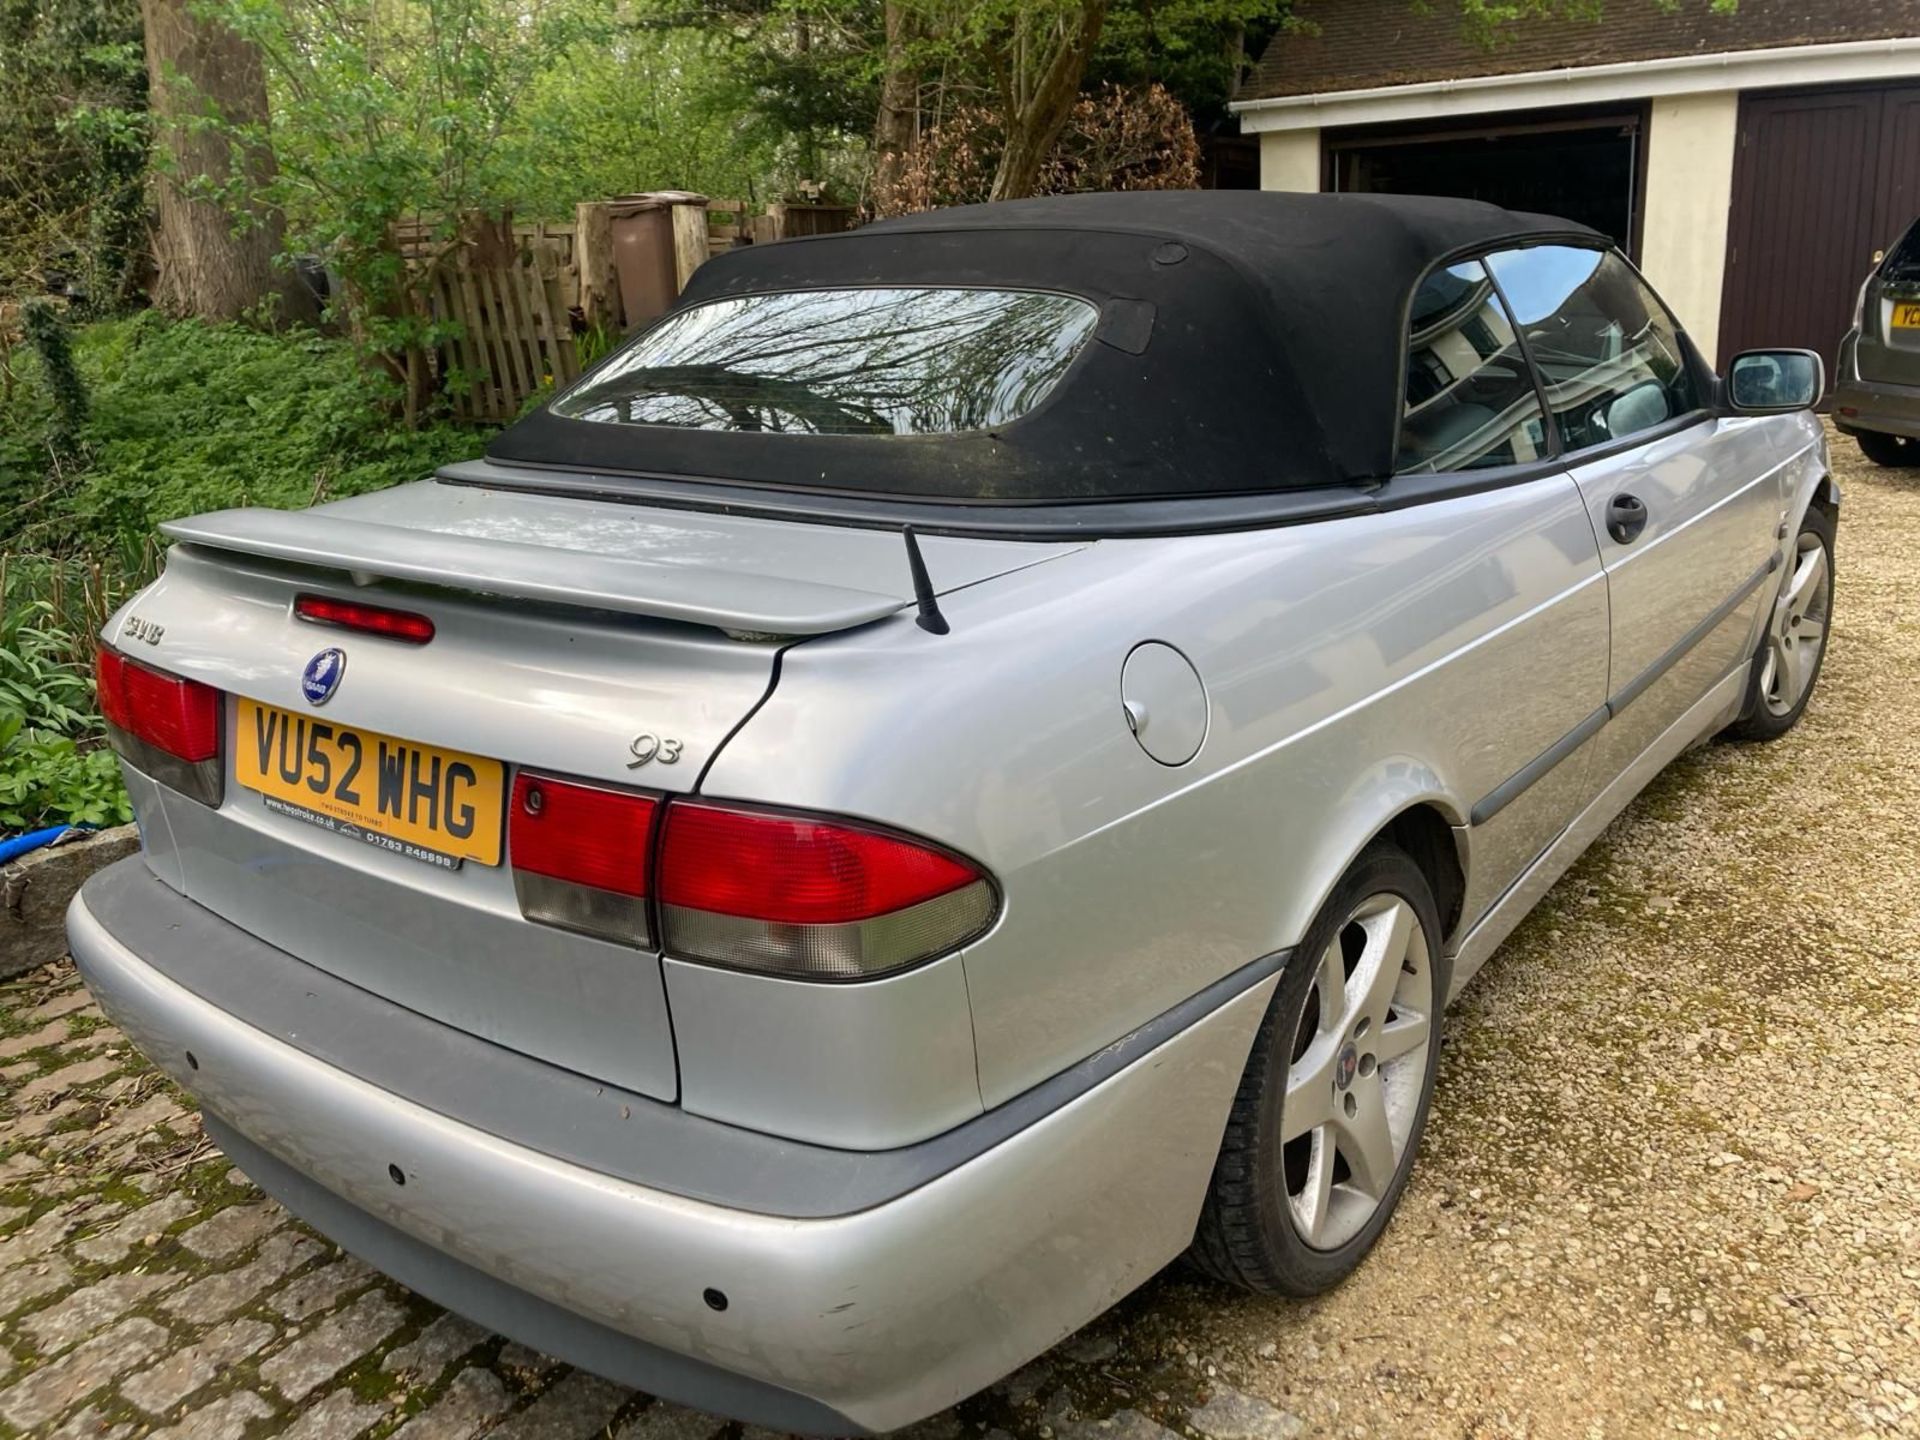 2002 Saab 9-3 Aero Convertible with 11 months MOT - Offered at No Reserve - Image 7 of 24